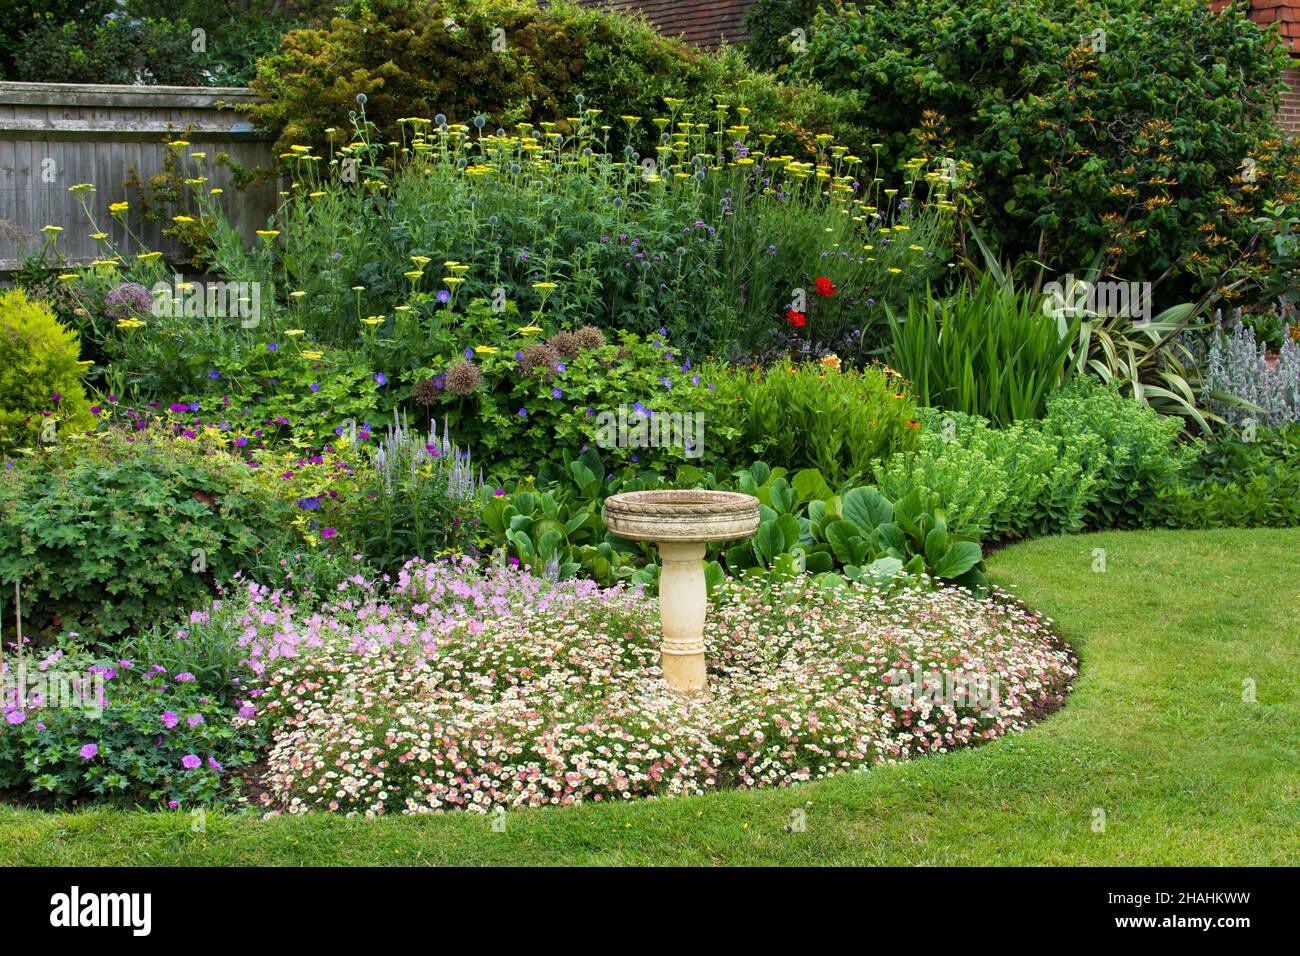 View of an English herbaceous perennial garden border in Summer with bird bath as central point of focus. Stock Photo